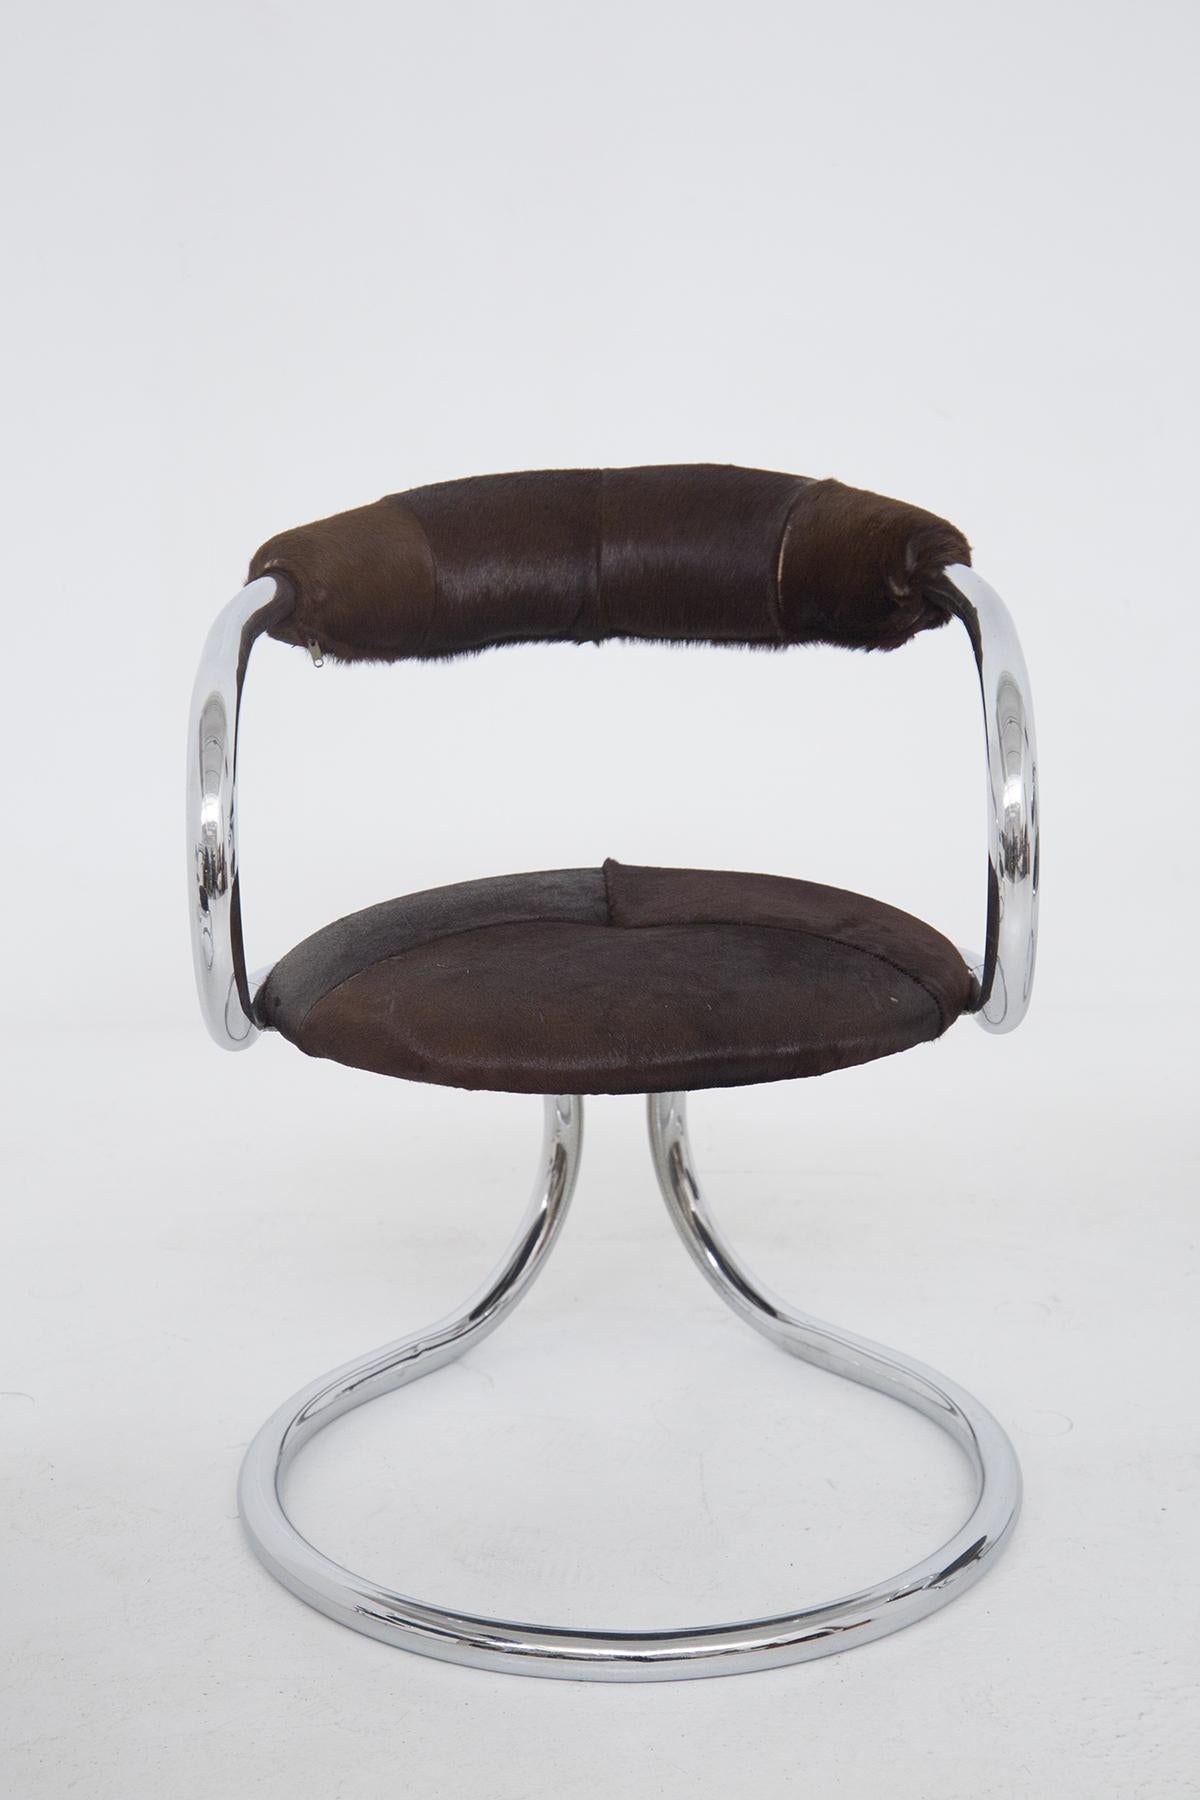 Giotto Stoppino Chairs in Chromed Steel and Pony 3